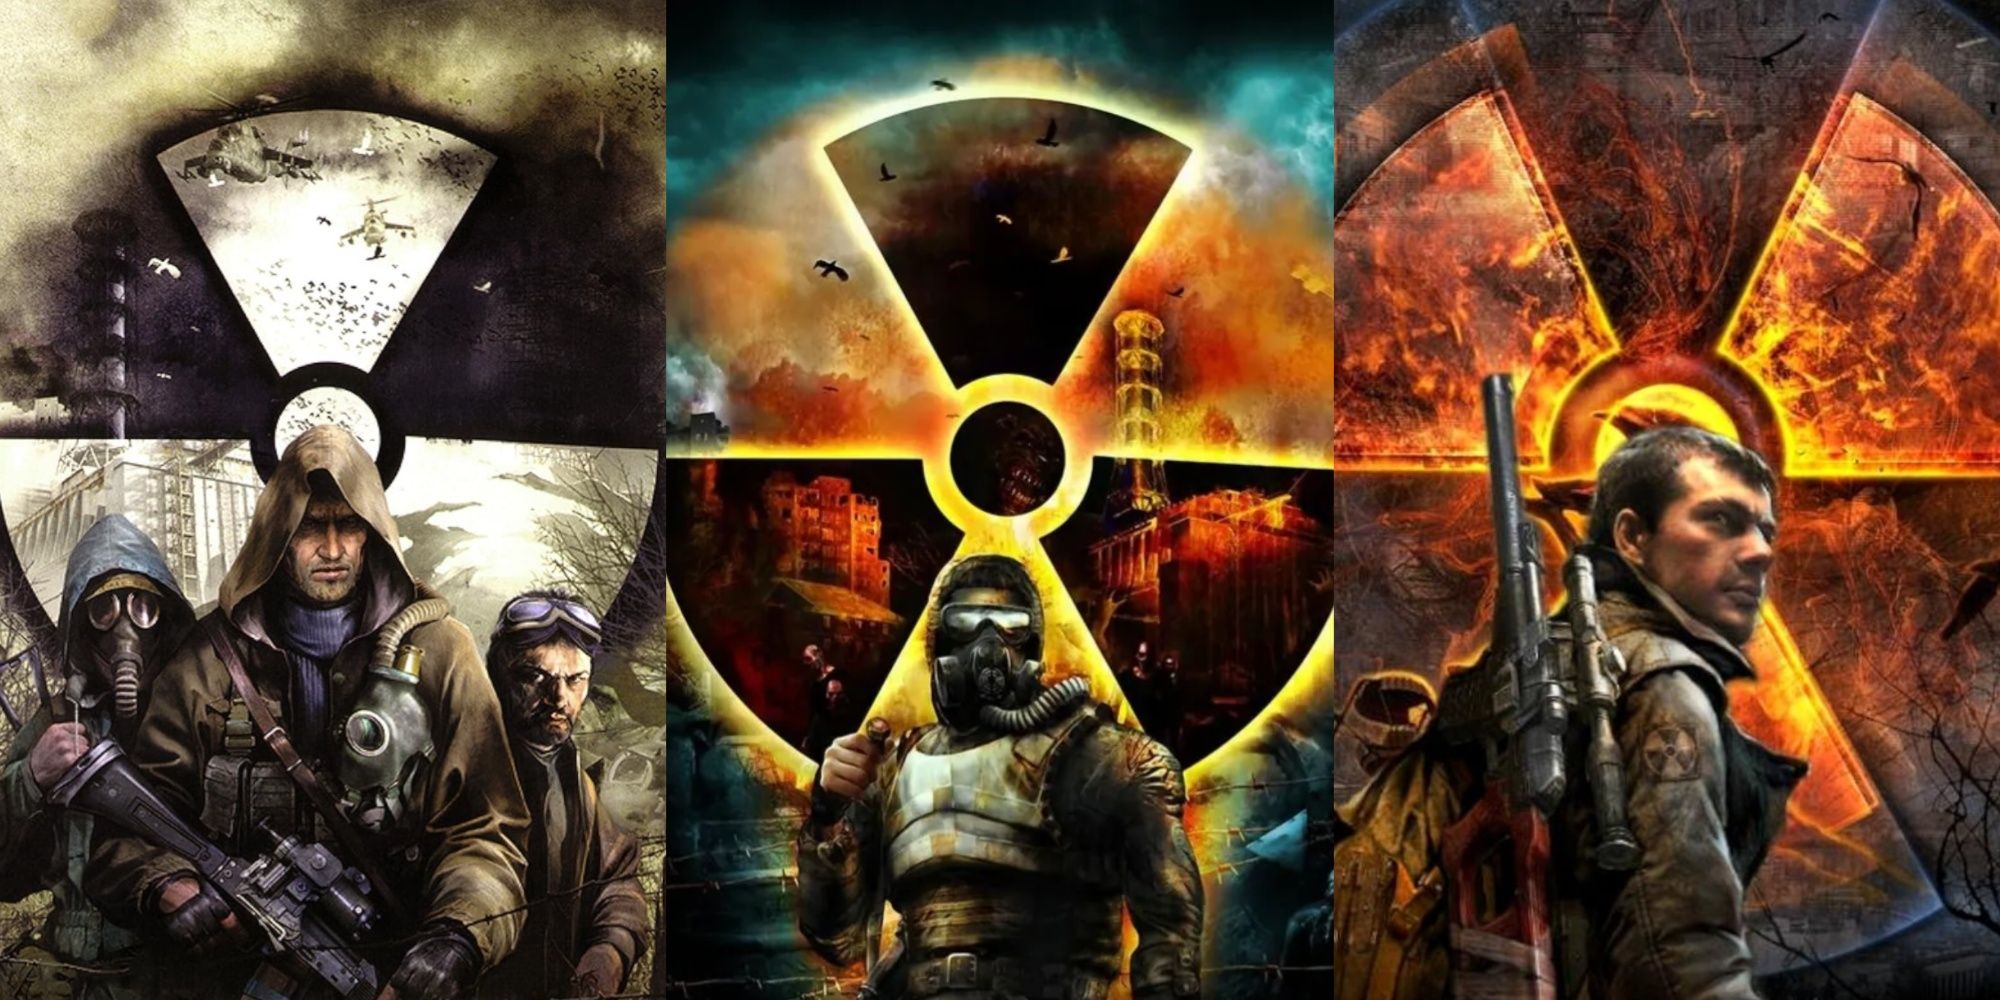 stalker shadow of chernobyl, clear sky, and call of pripyat cover art